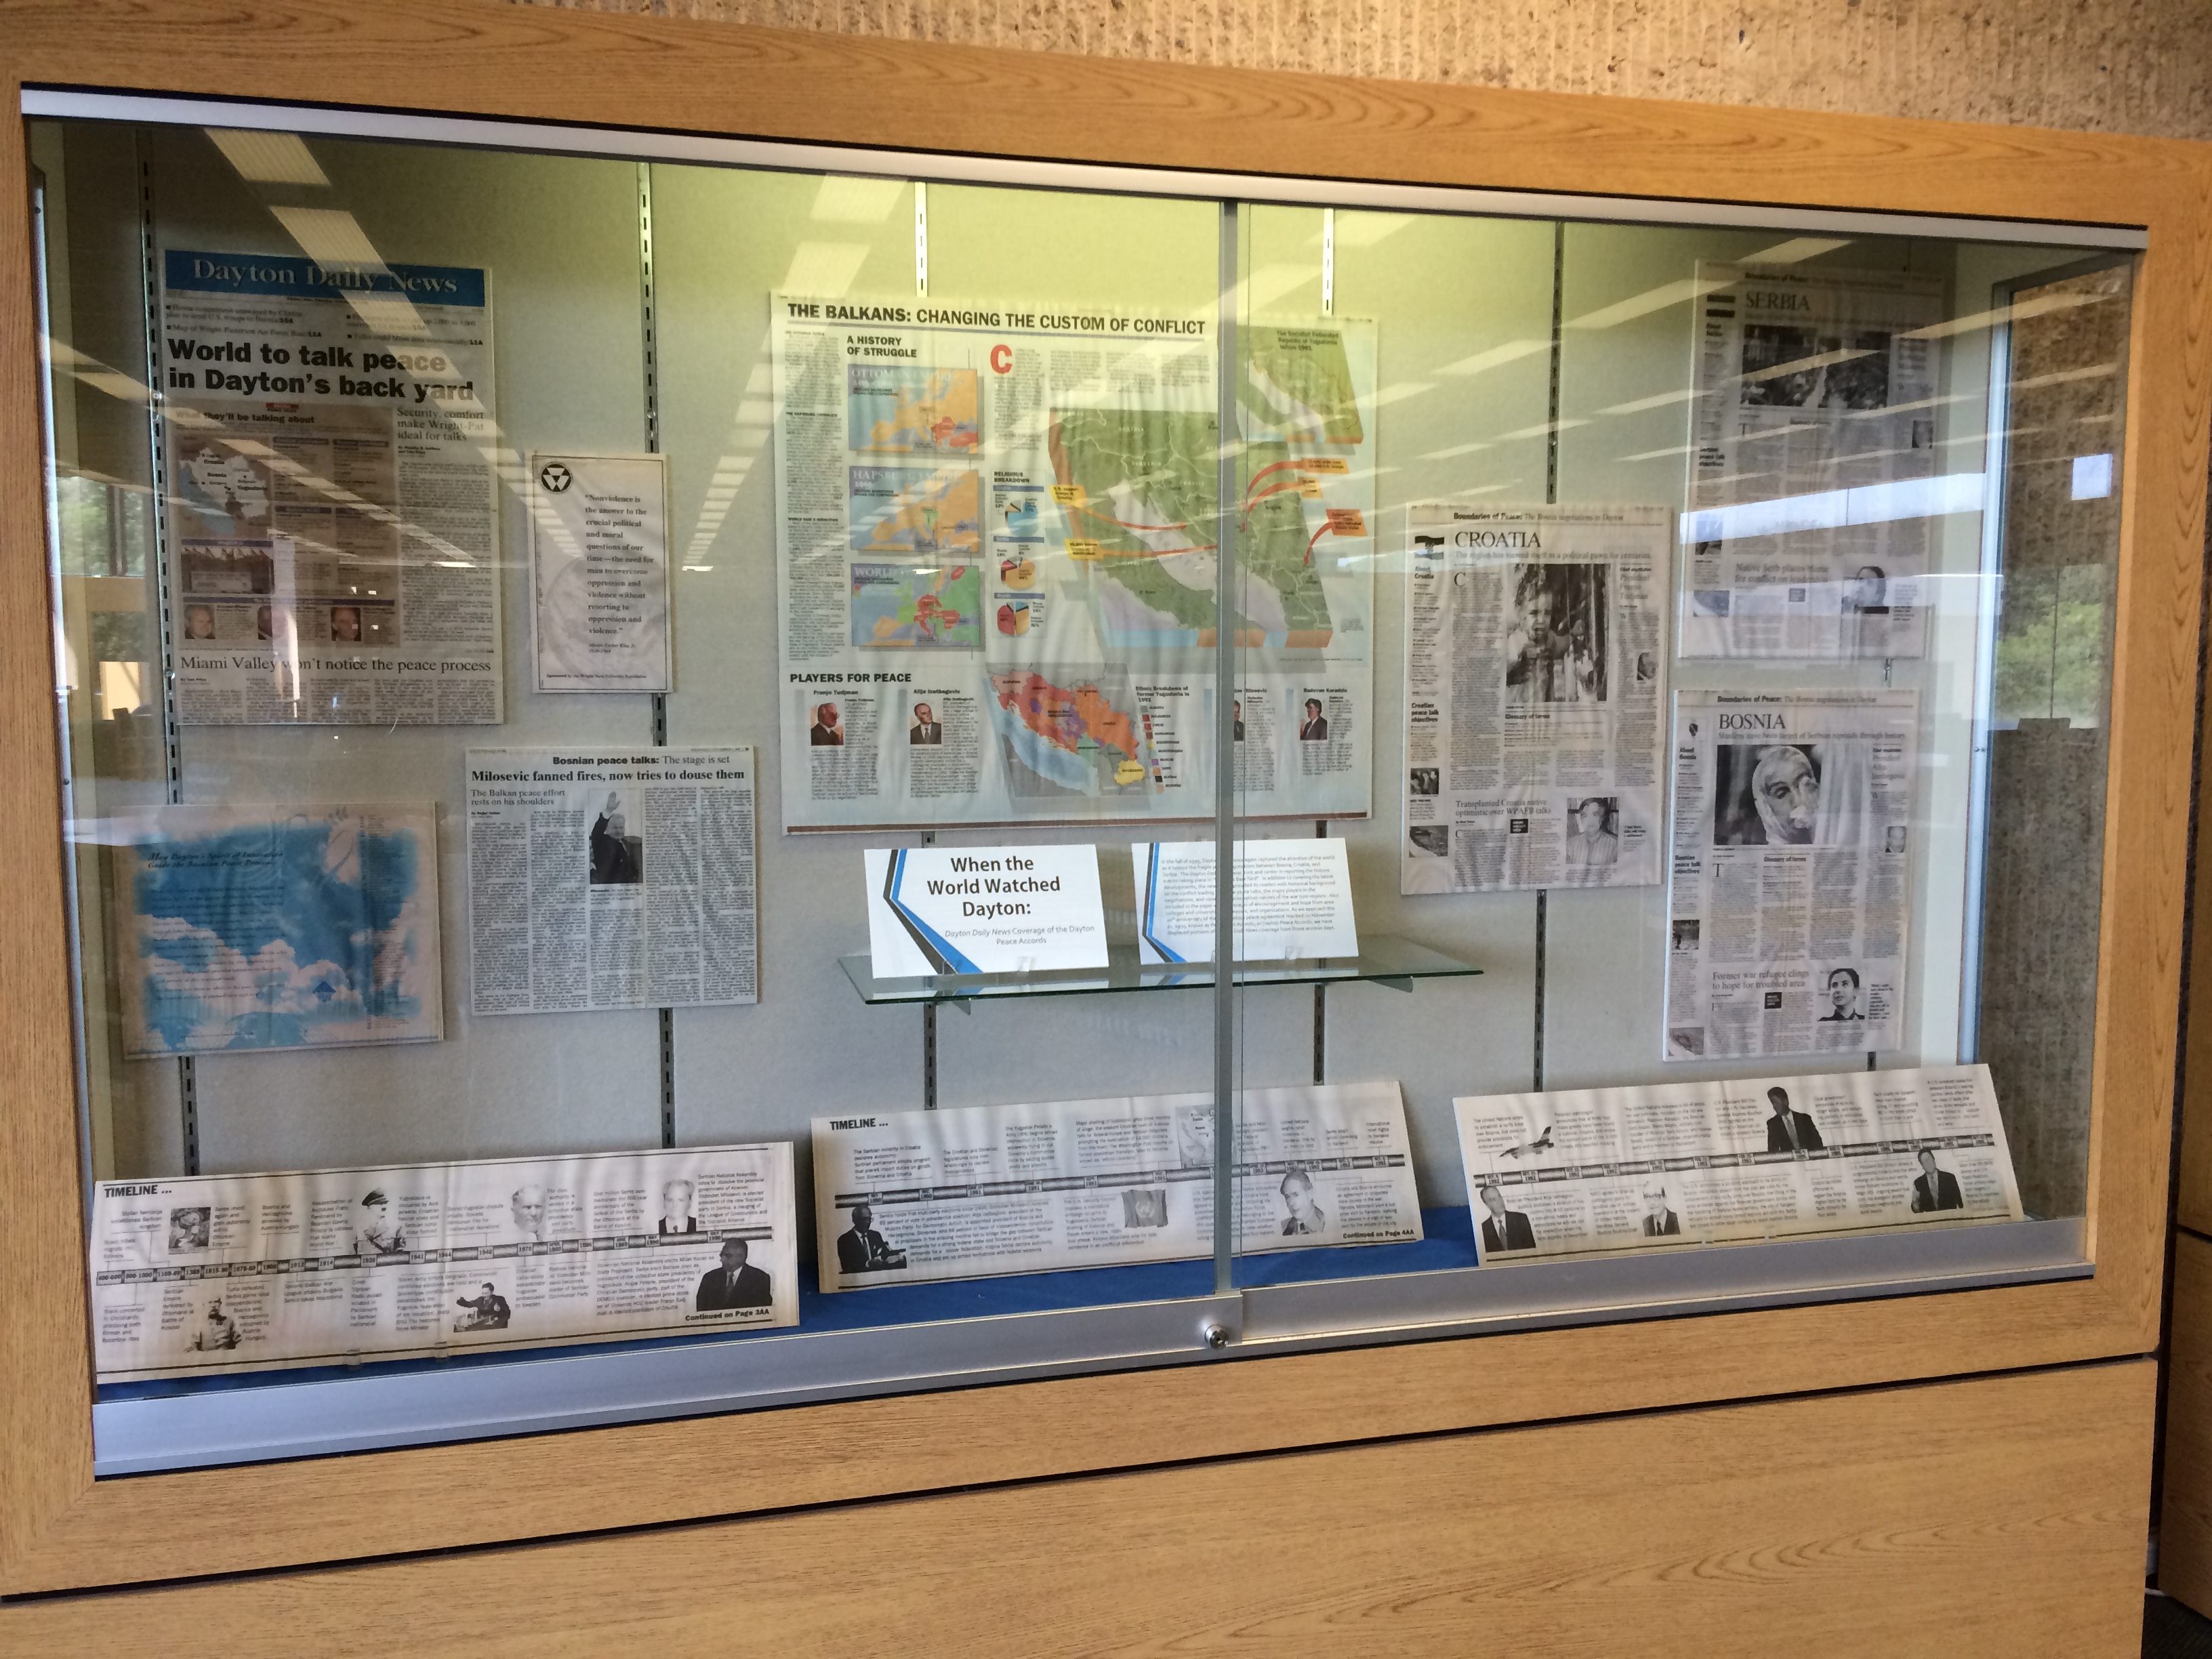 Dayton Peace Accords exhibit "When the World Watched Dayton" (1 of 2 panels on the second floor of Dunbar Library), August 2015.